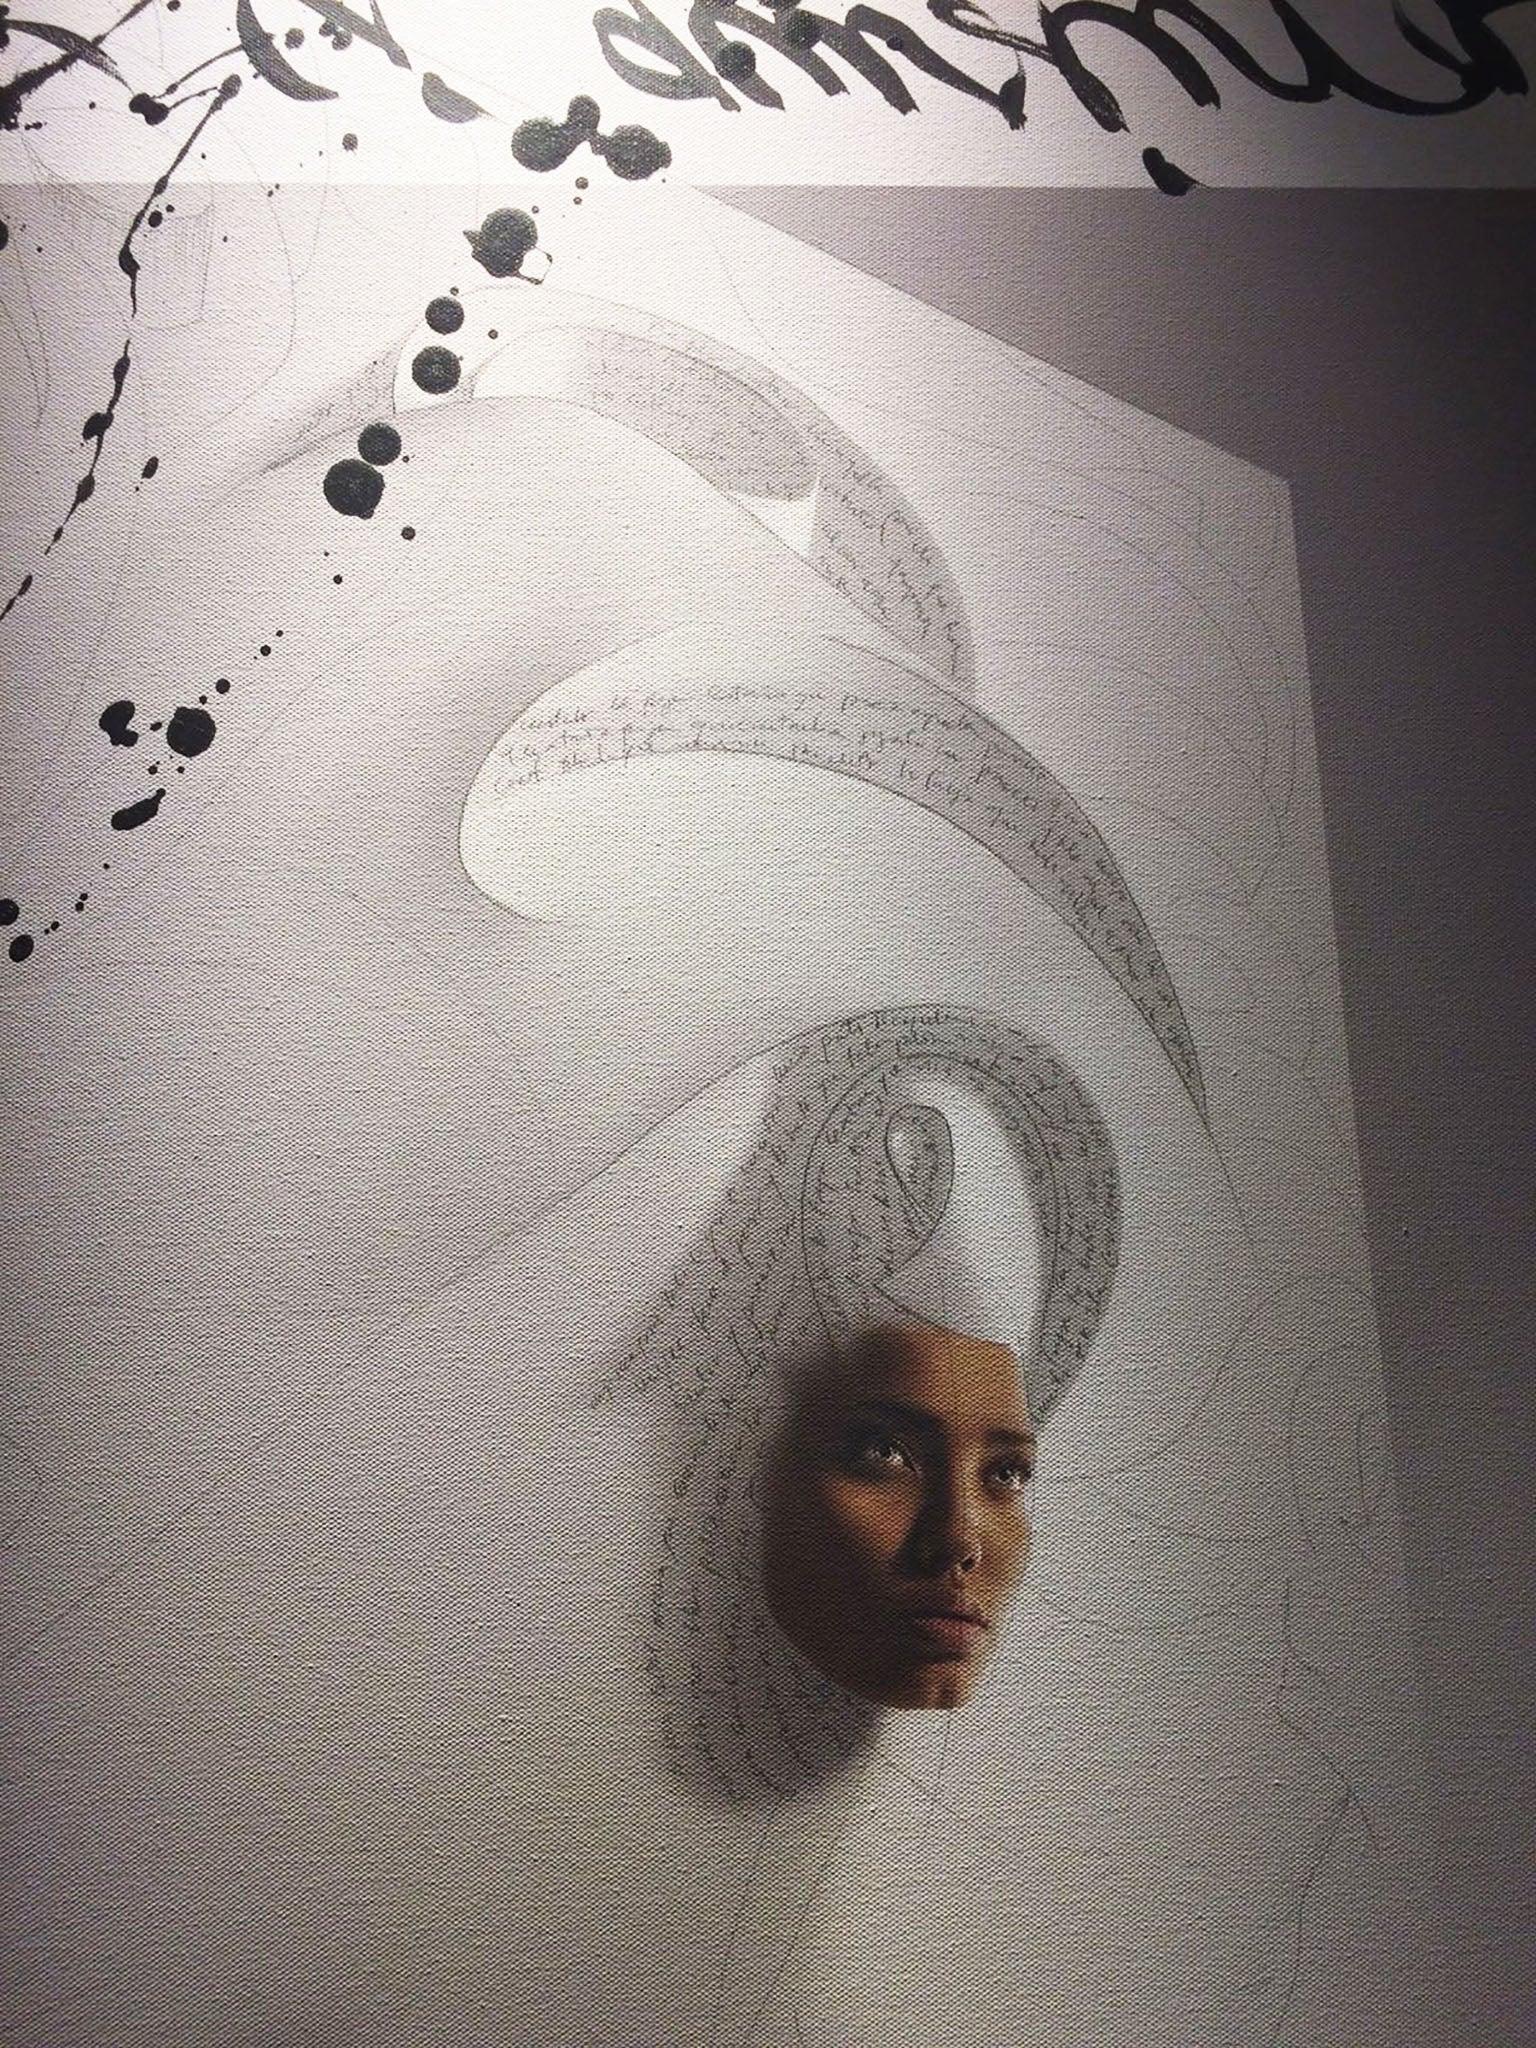 Black girl melting in origami head piece by Efren Isaza
Archival pigment print on canvas, intervened with paint, ink and intentionally scratched by the artist
Signed, titled, dated and annotated by the artist in pencil on verso
One of a